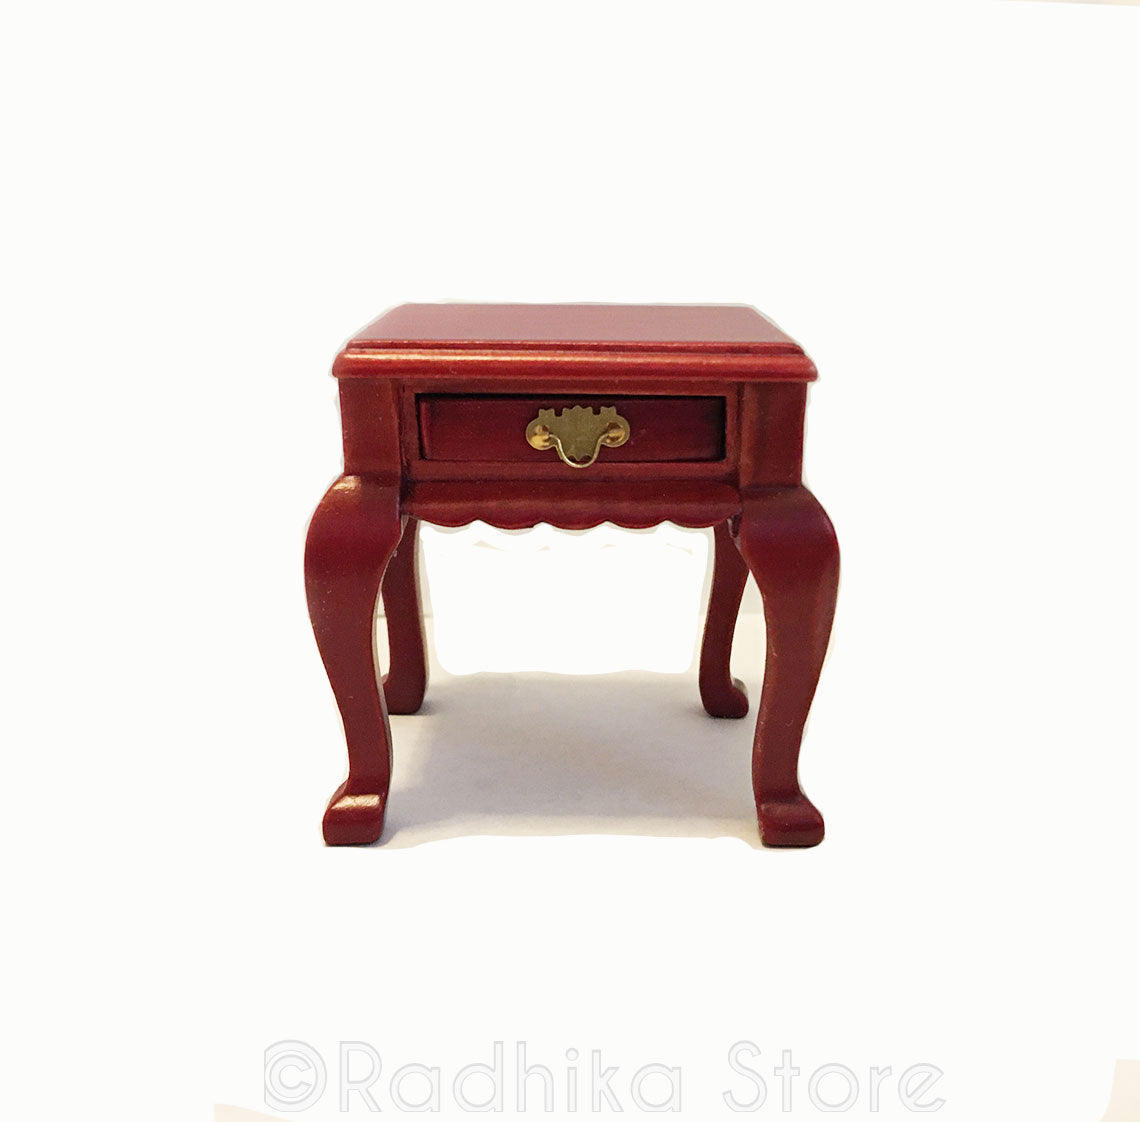 Fancy Chawki (Offering Table) or End Table With Drawer- Cherry Finish